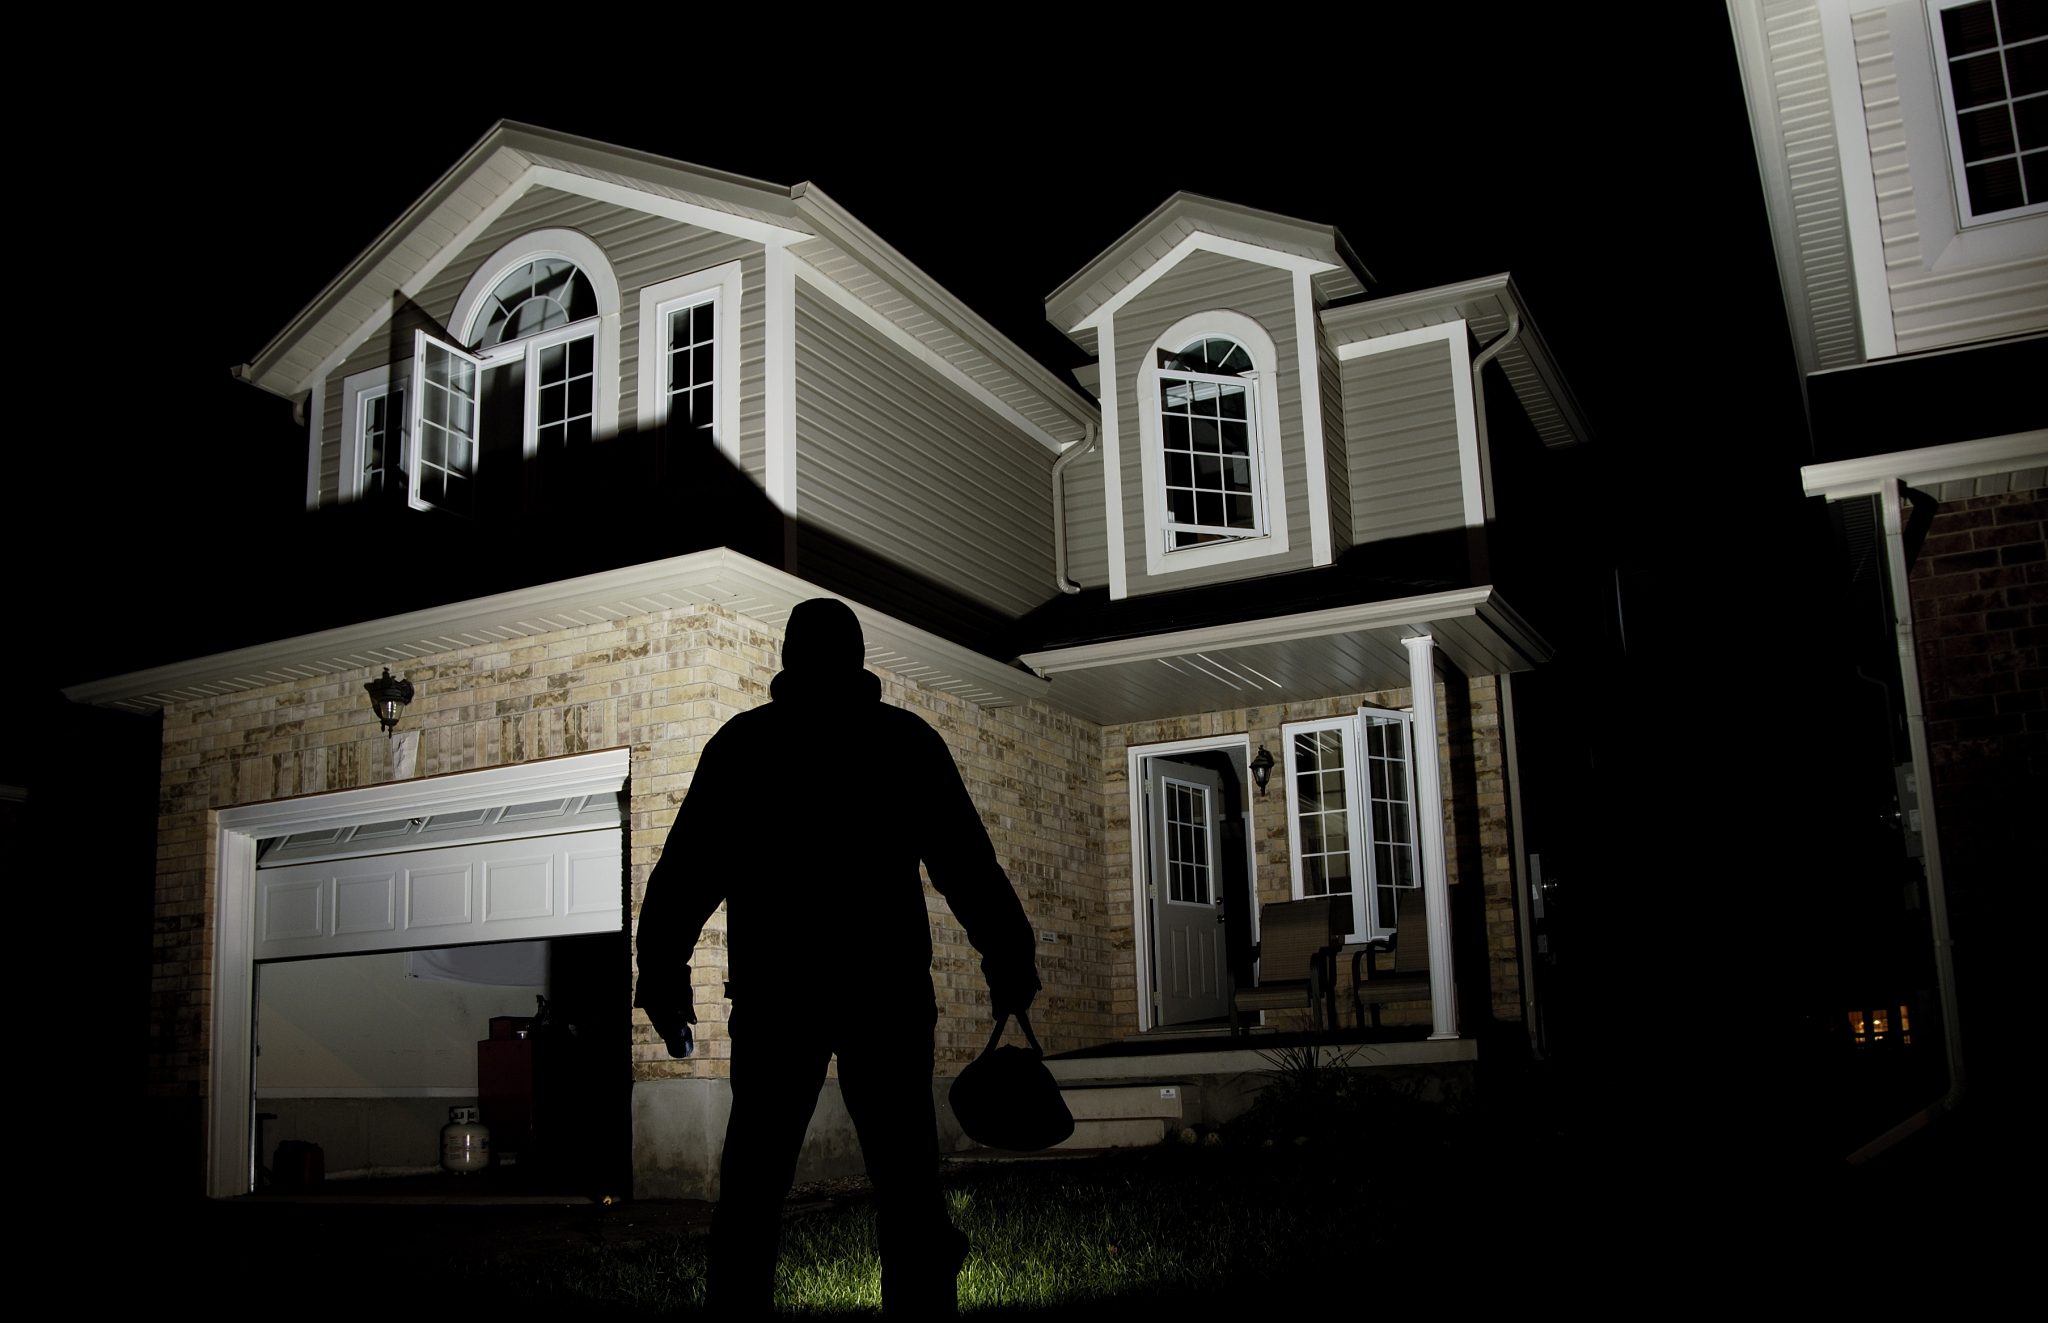 Tips for keeping your home or business secure